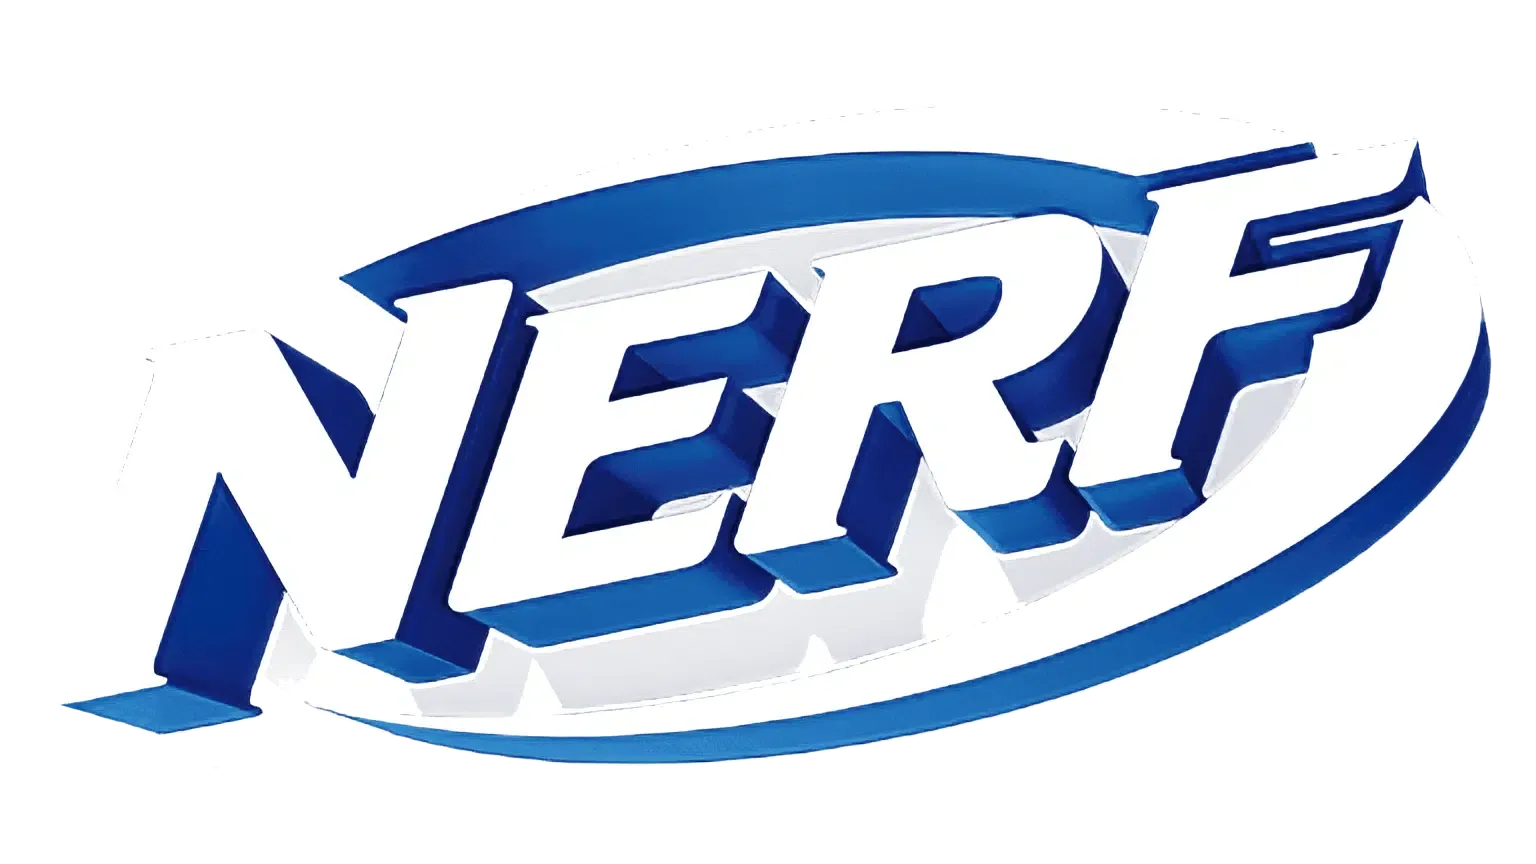 2020 – Present: The Seventh Version Of The NERF Logo